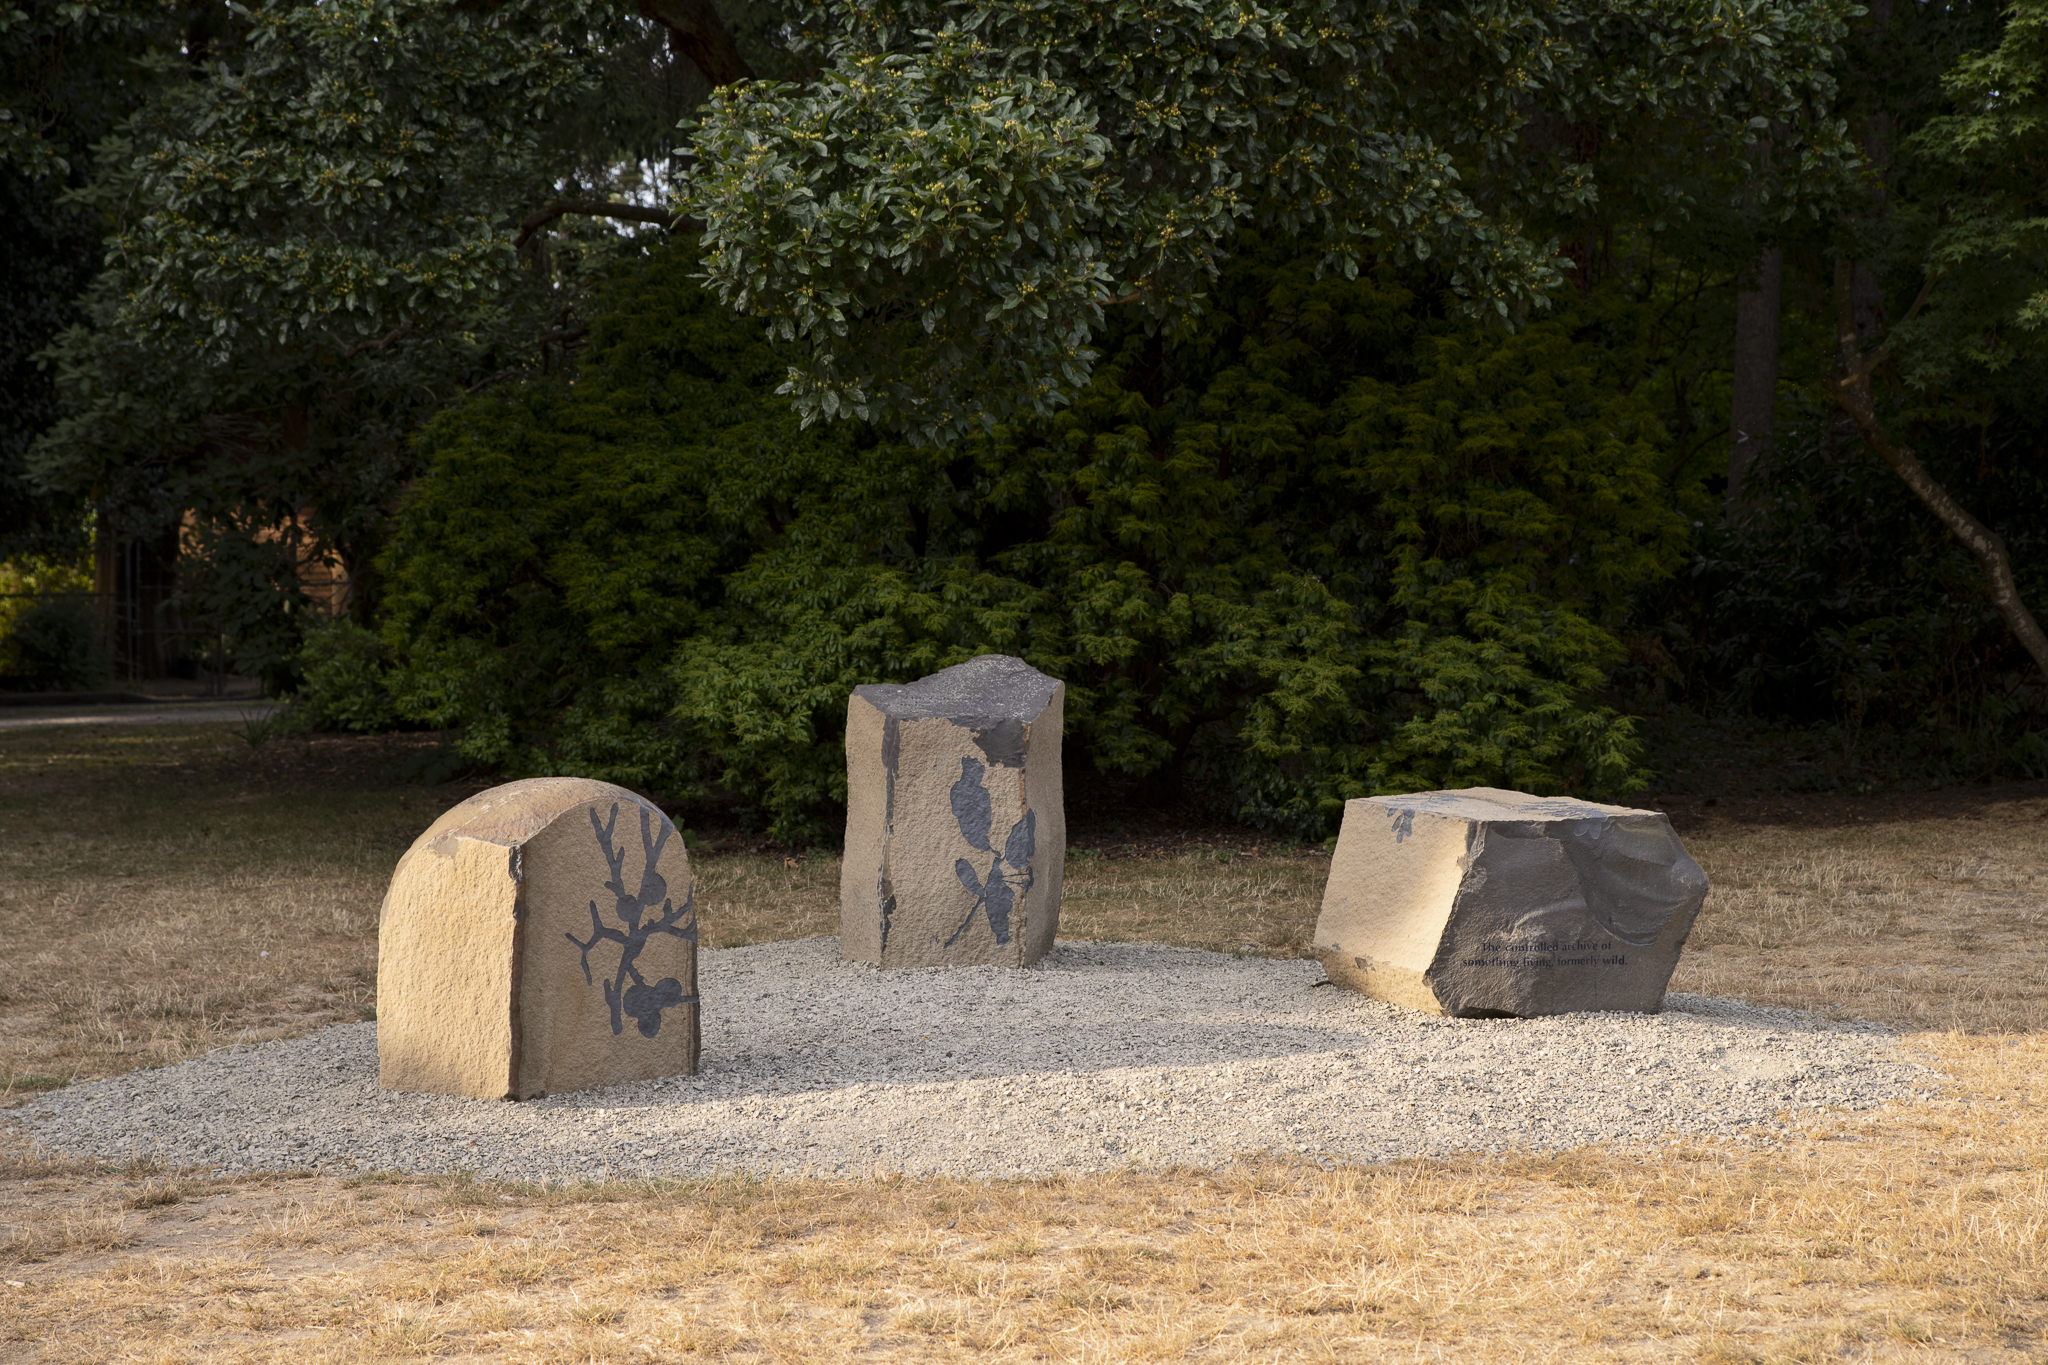 Three boulders in a gravel circle in front of green trees. The boulders are etched with plant outlines and some illegible text.